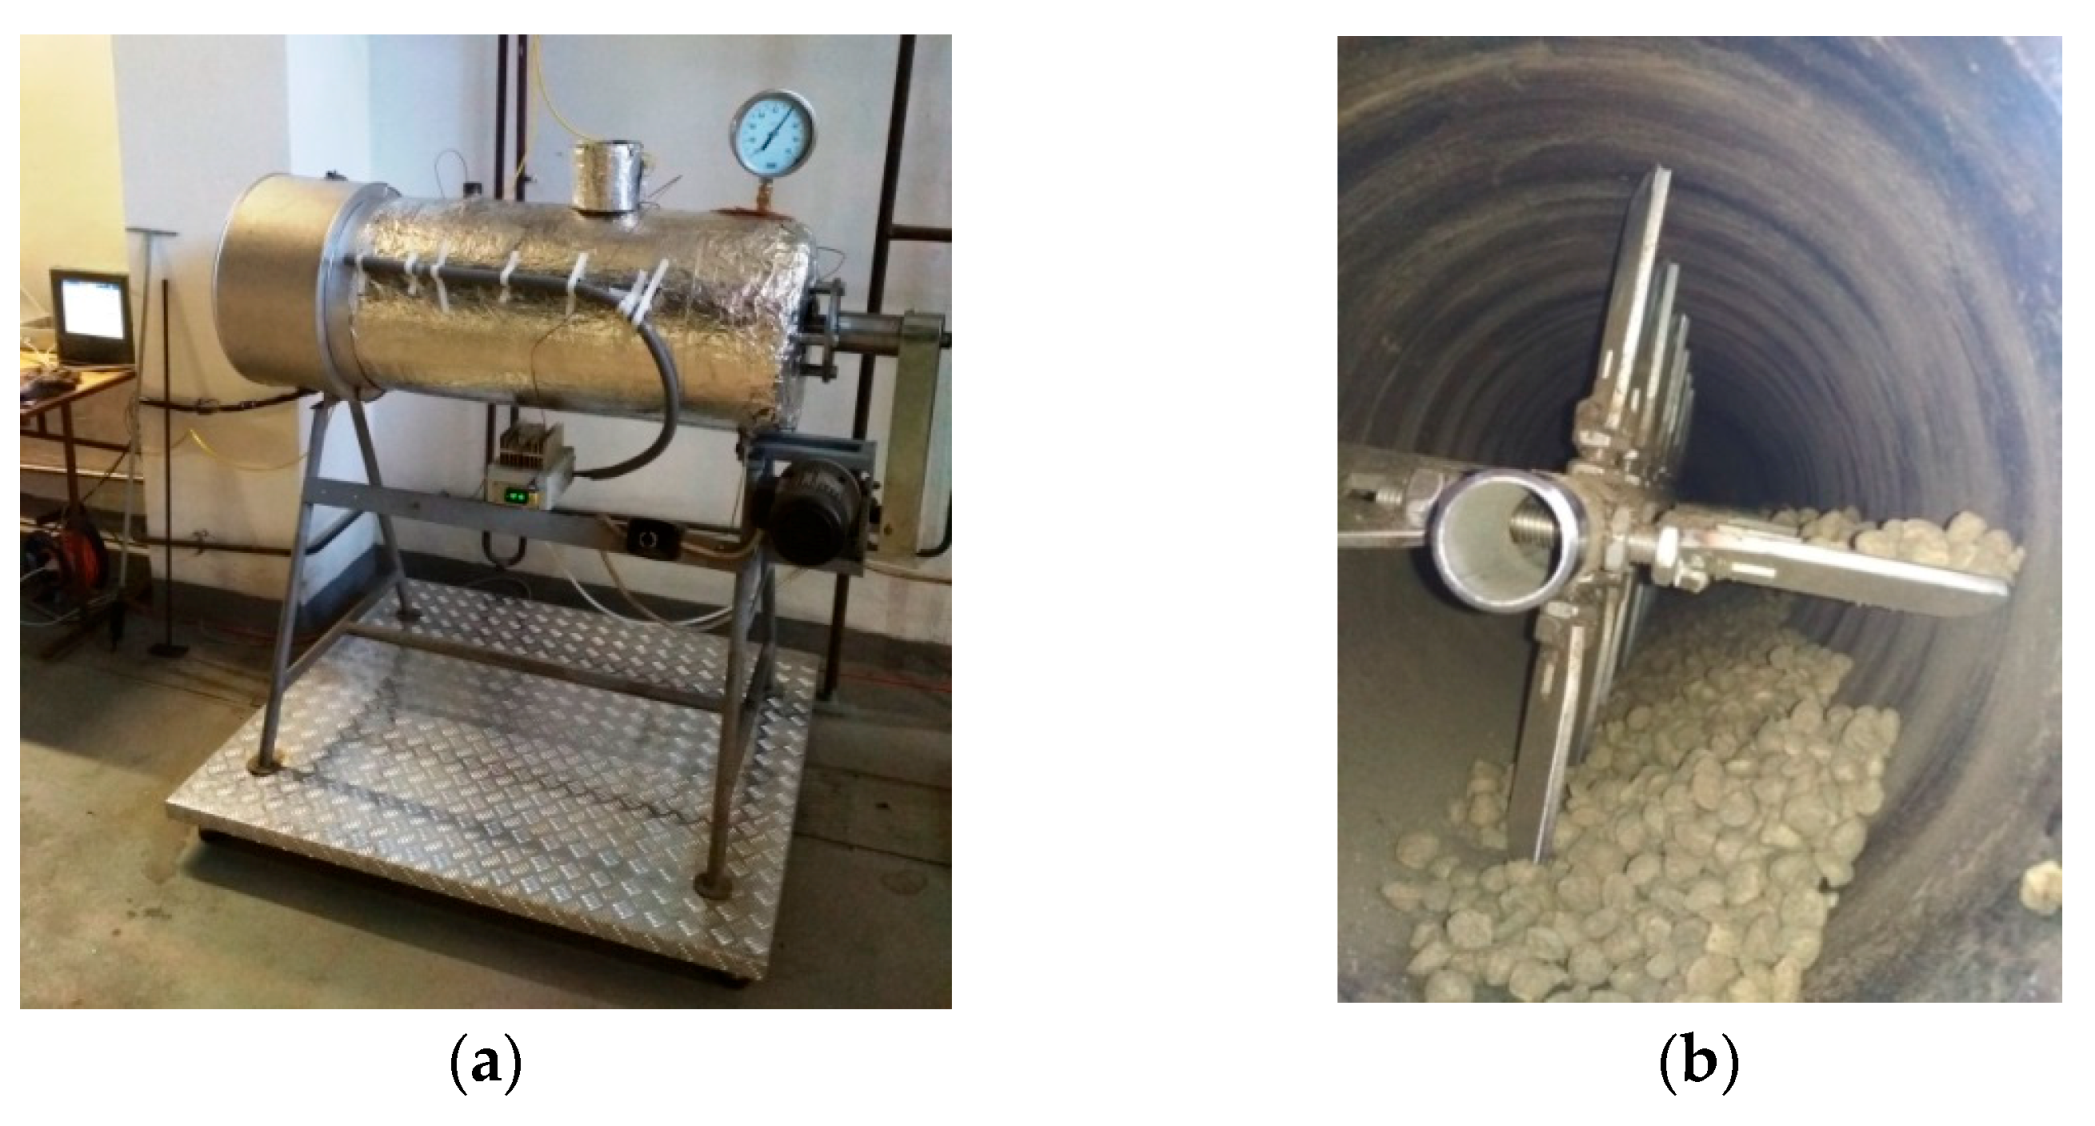 ChemEngineering | Free Full-Text | Indirect Dryers for Biomass Drying—Comparison  of Experimental Characteristics for Drum and Rotary Configurations